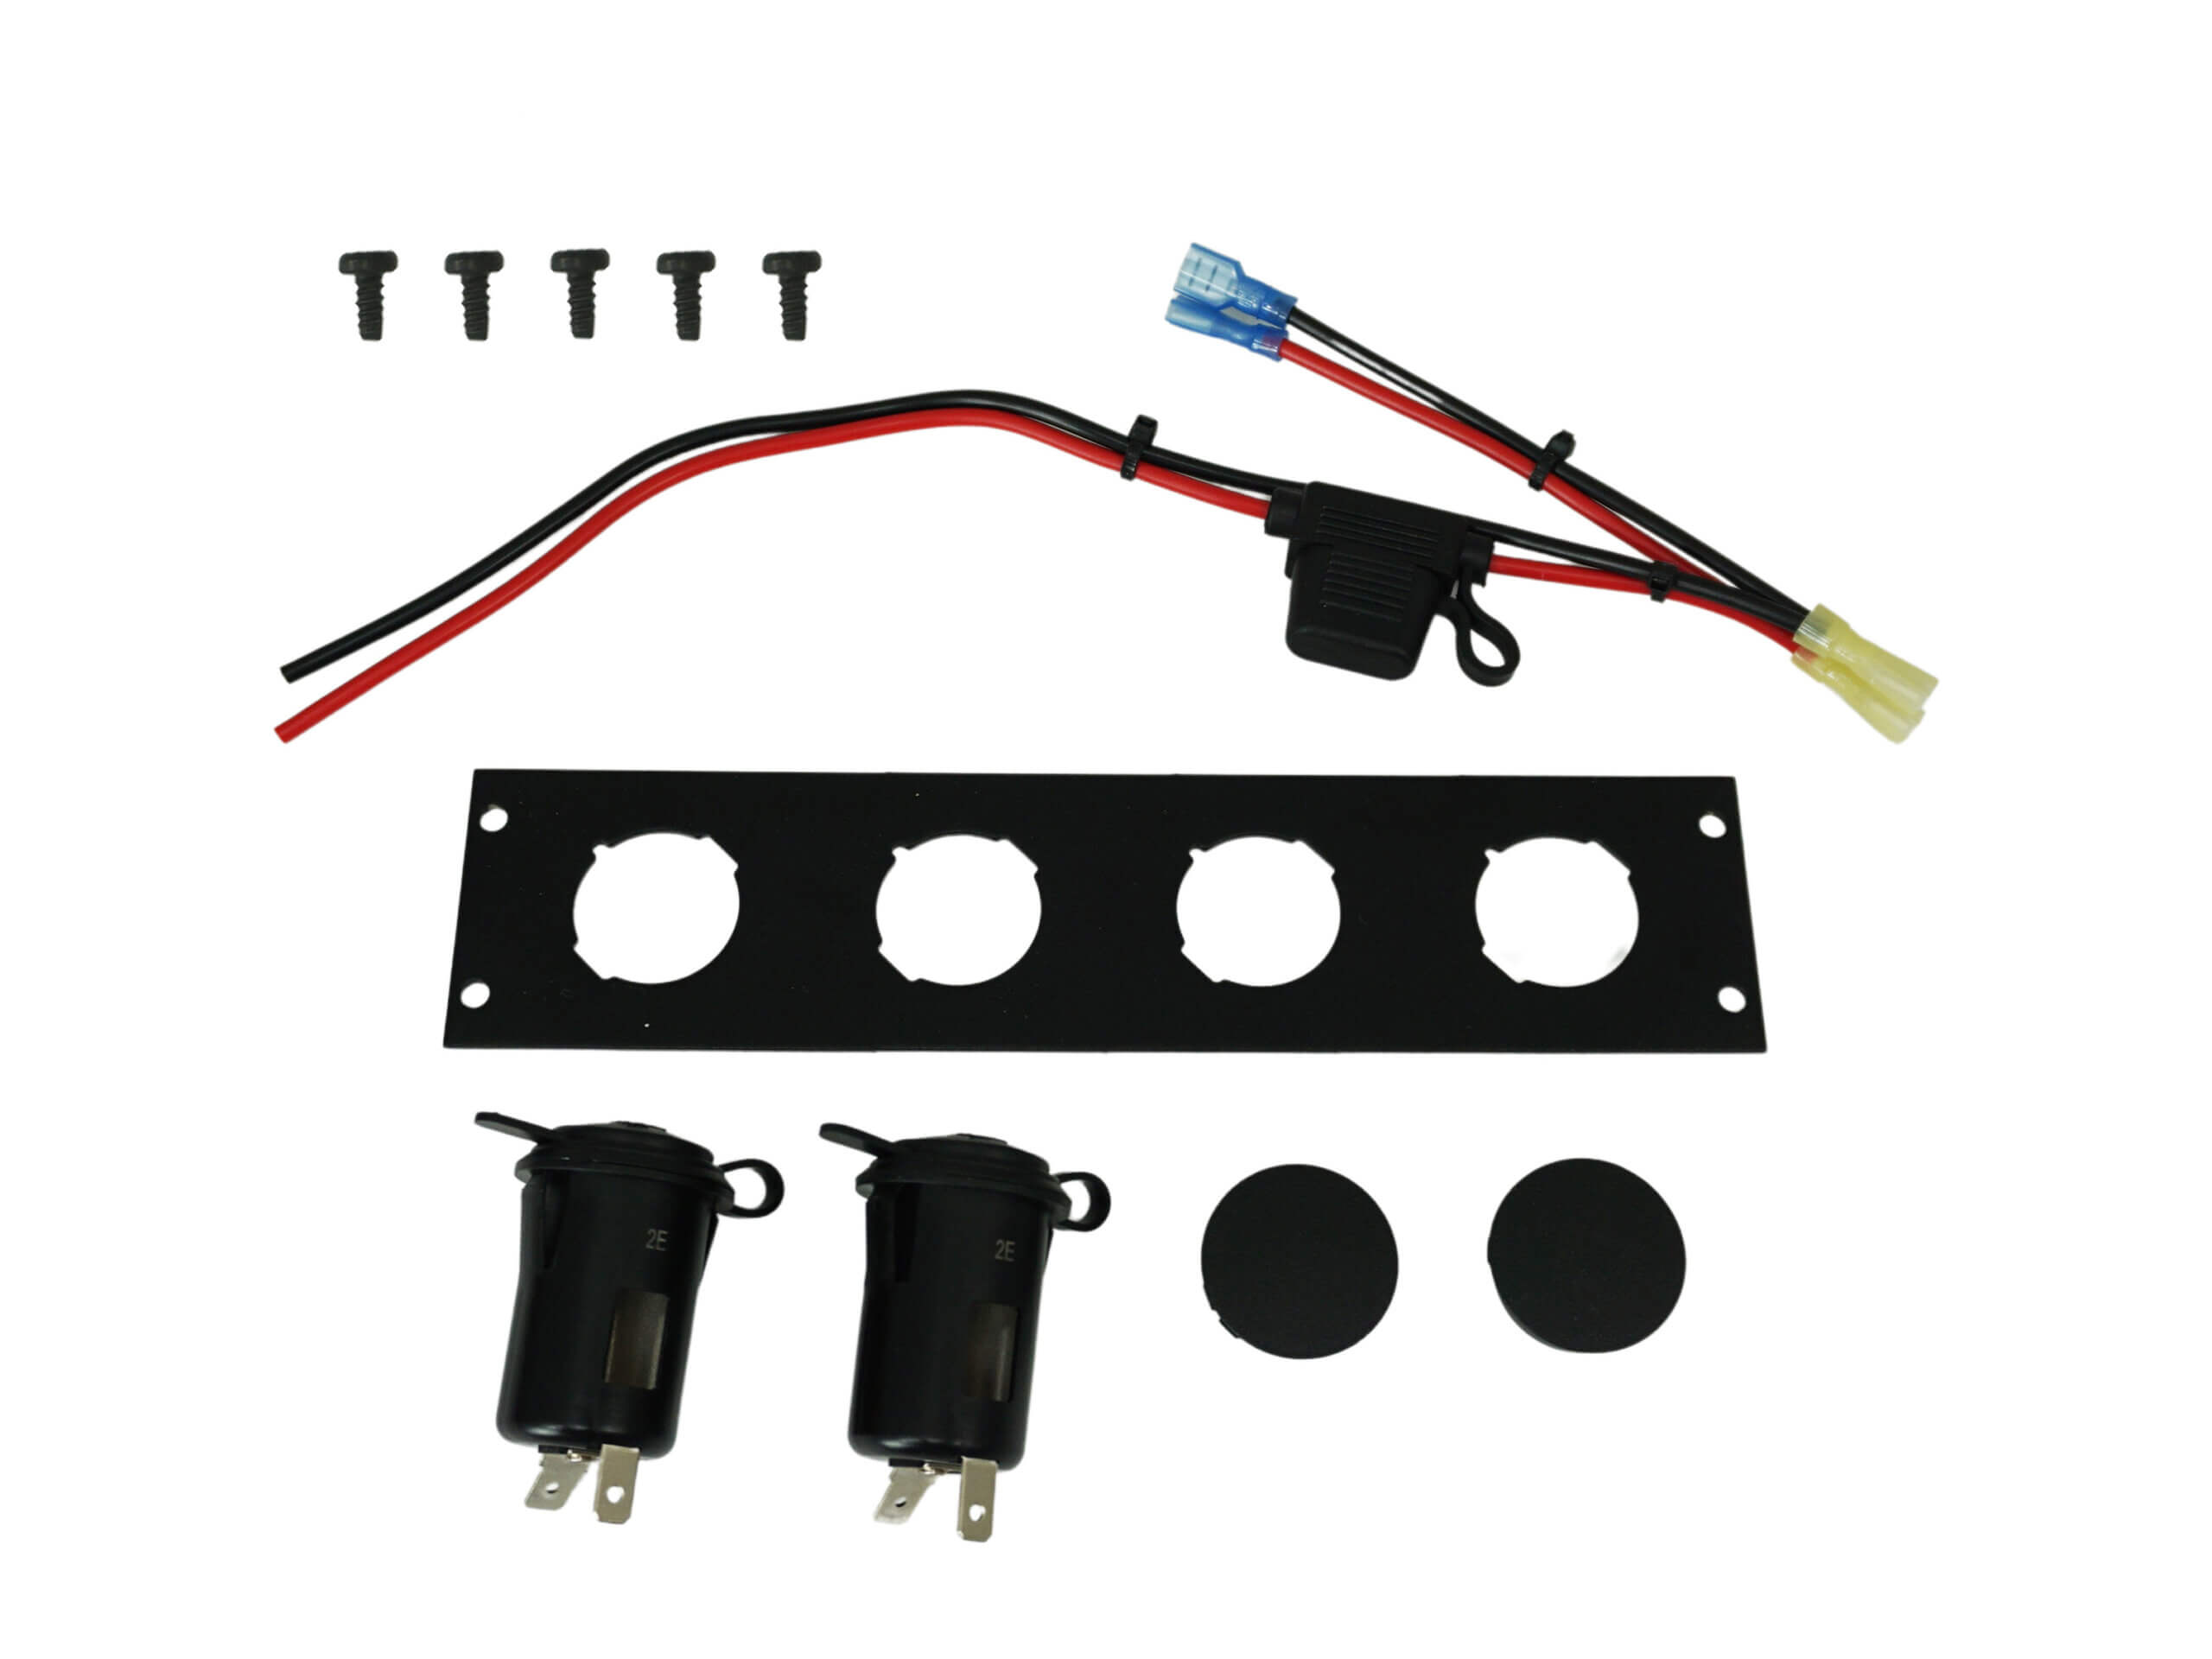 Console Accessory Bracket Kit with 2 Lighter Plug Outlets